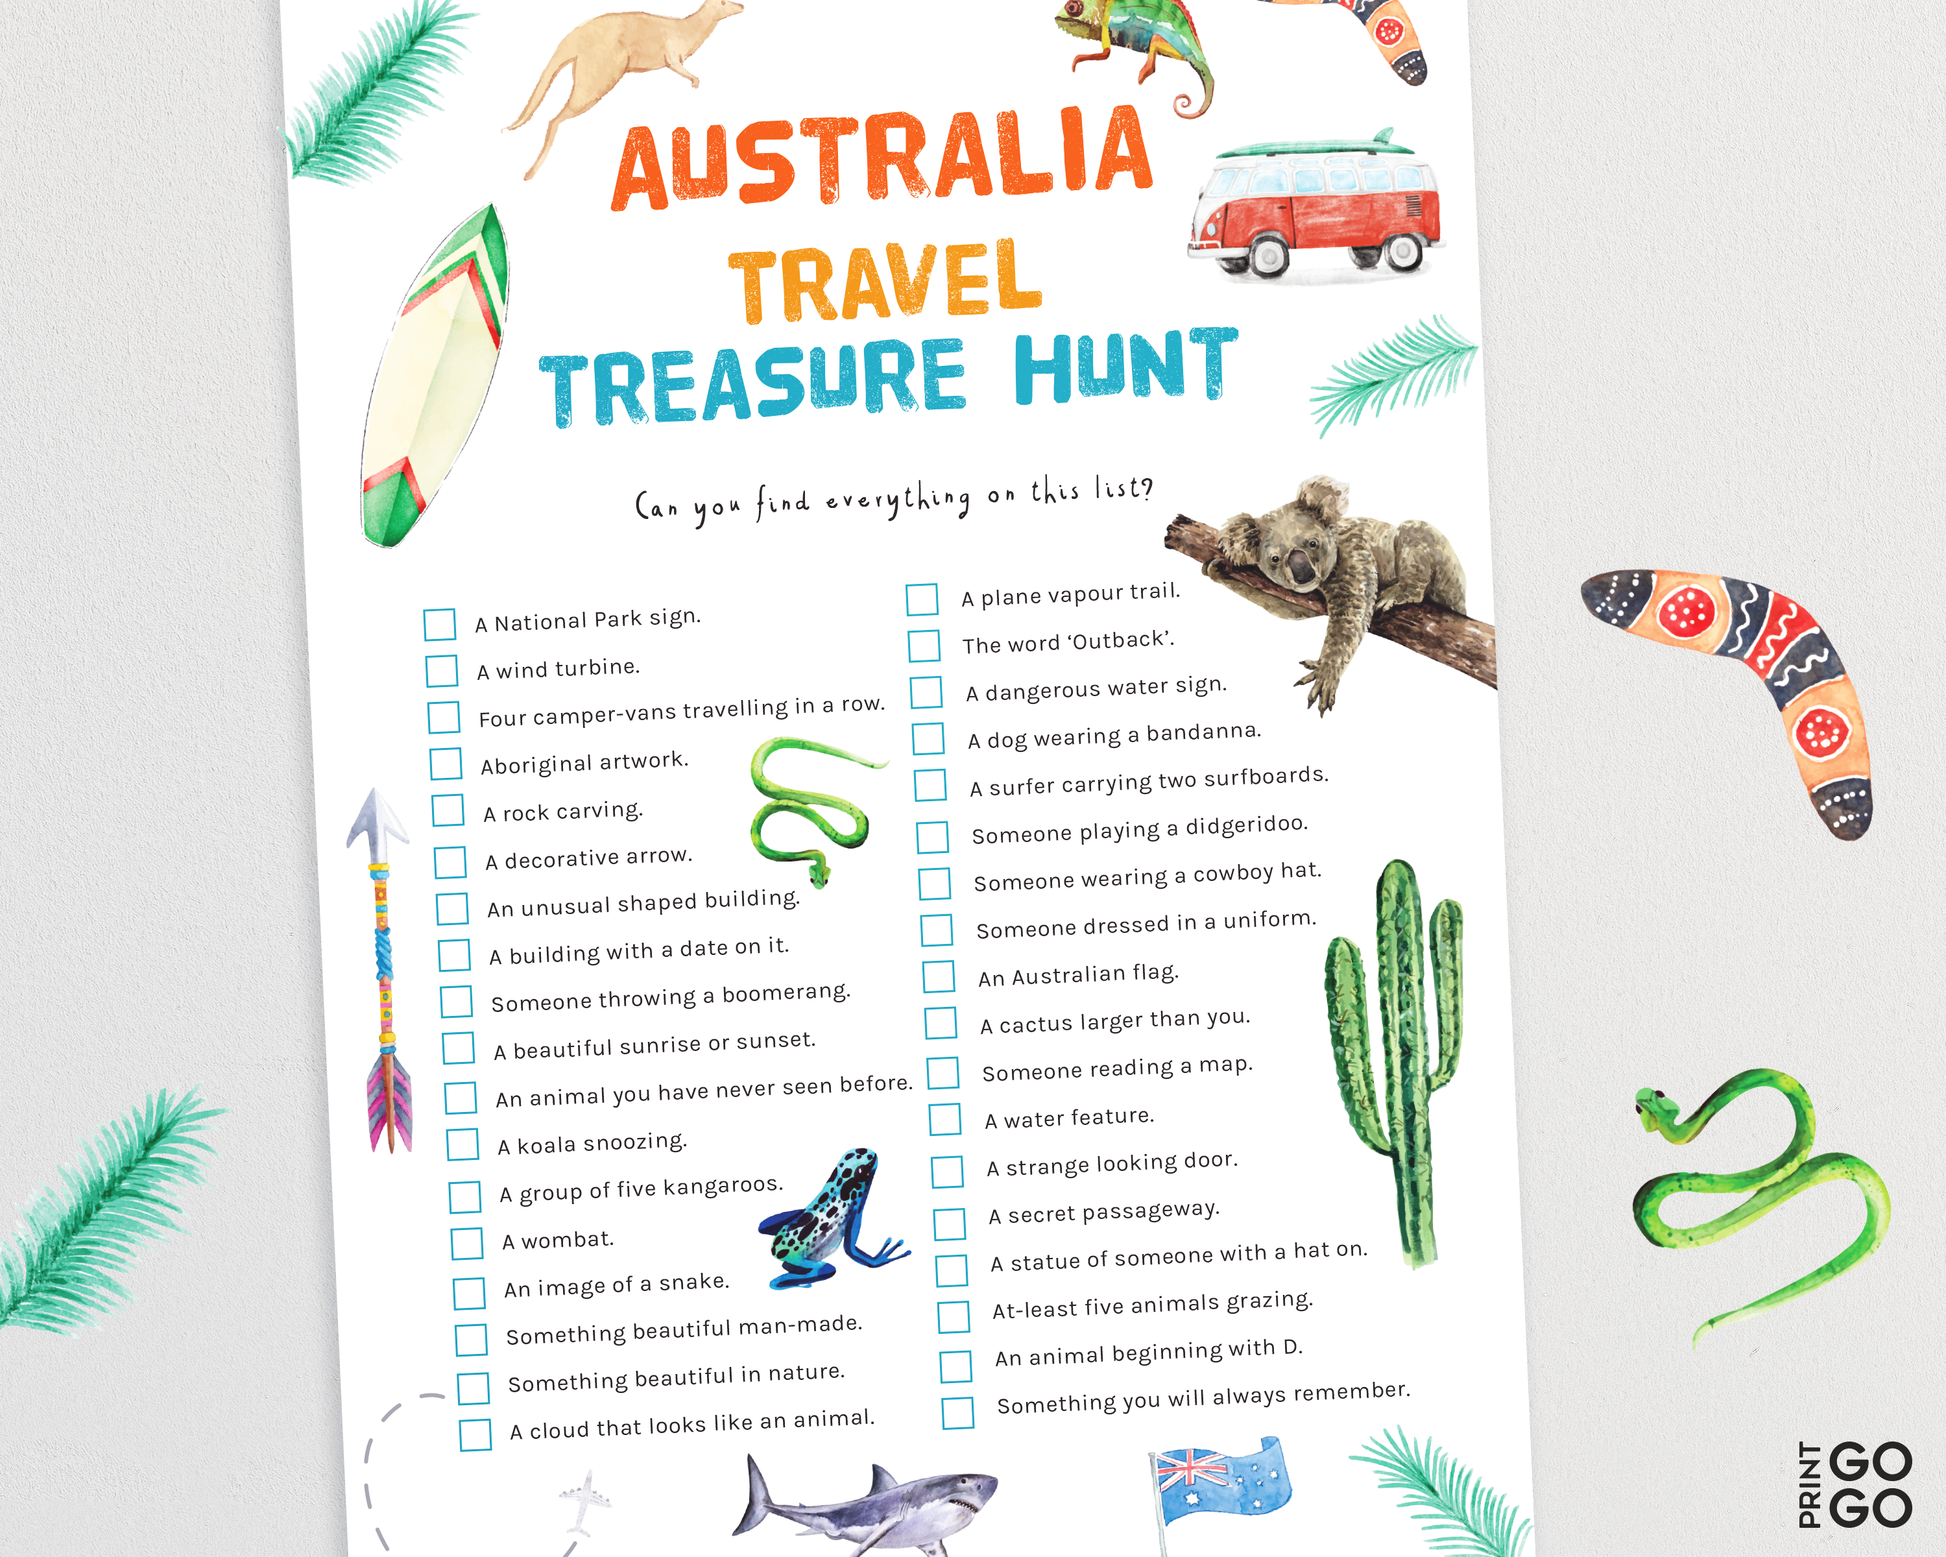 Spark curiosity in kids and keep them entertained on your holiday, or staycation, in Australia. Can they find all the items on the list?